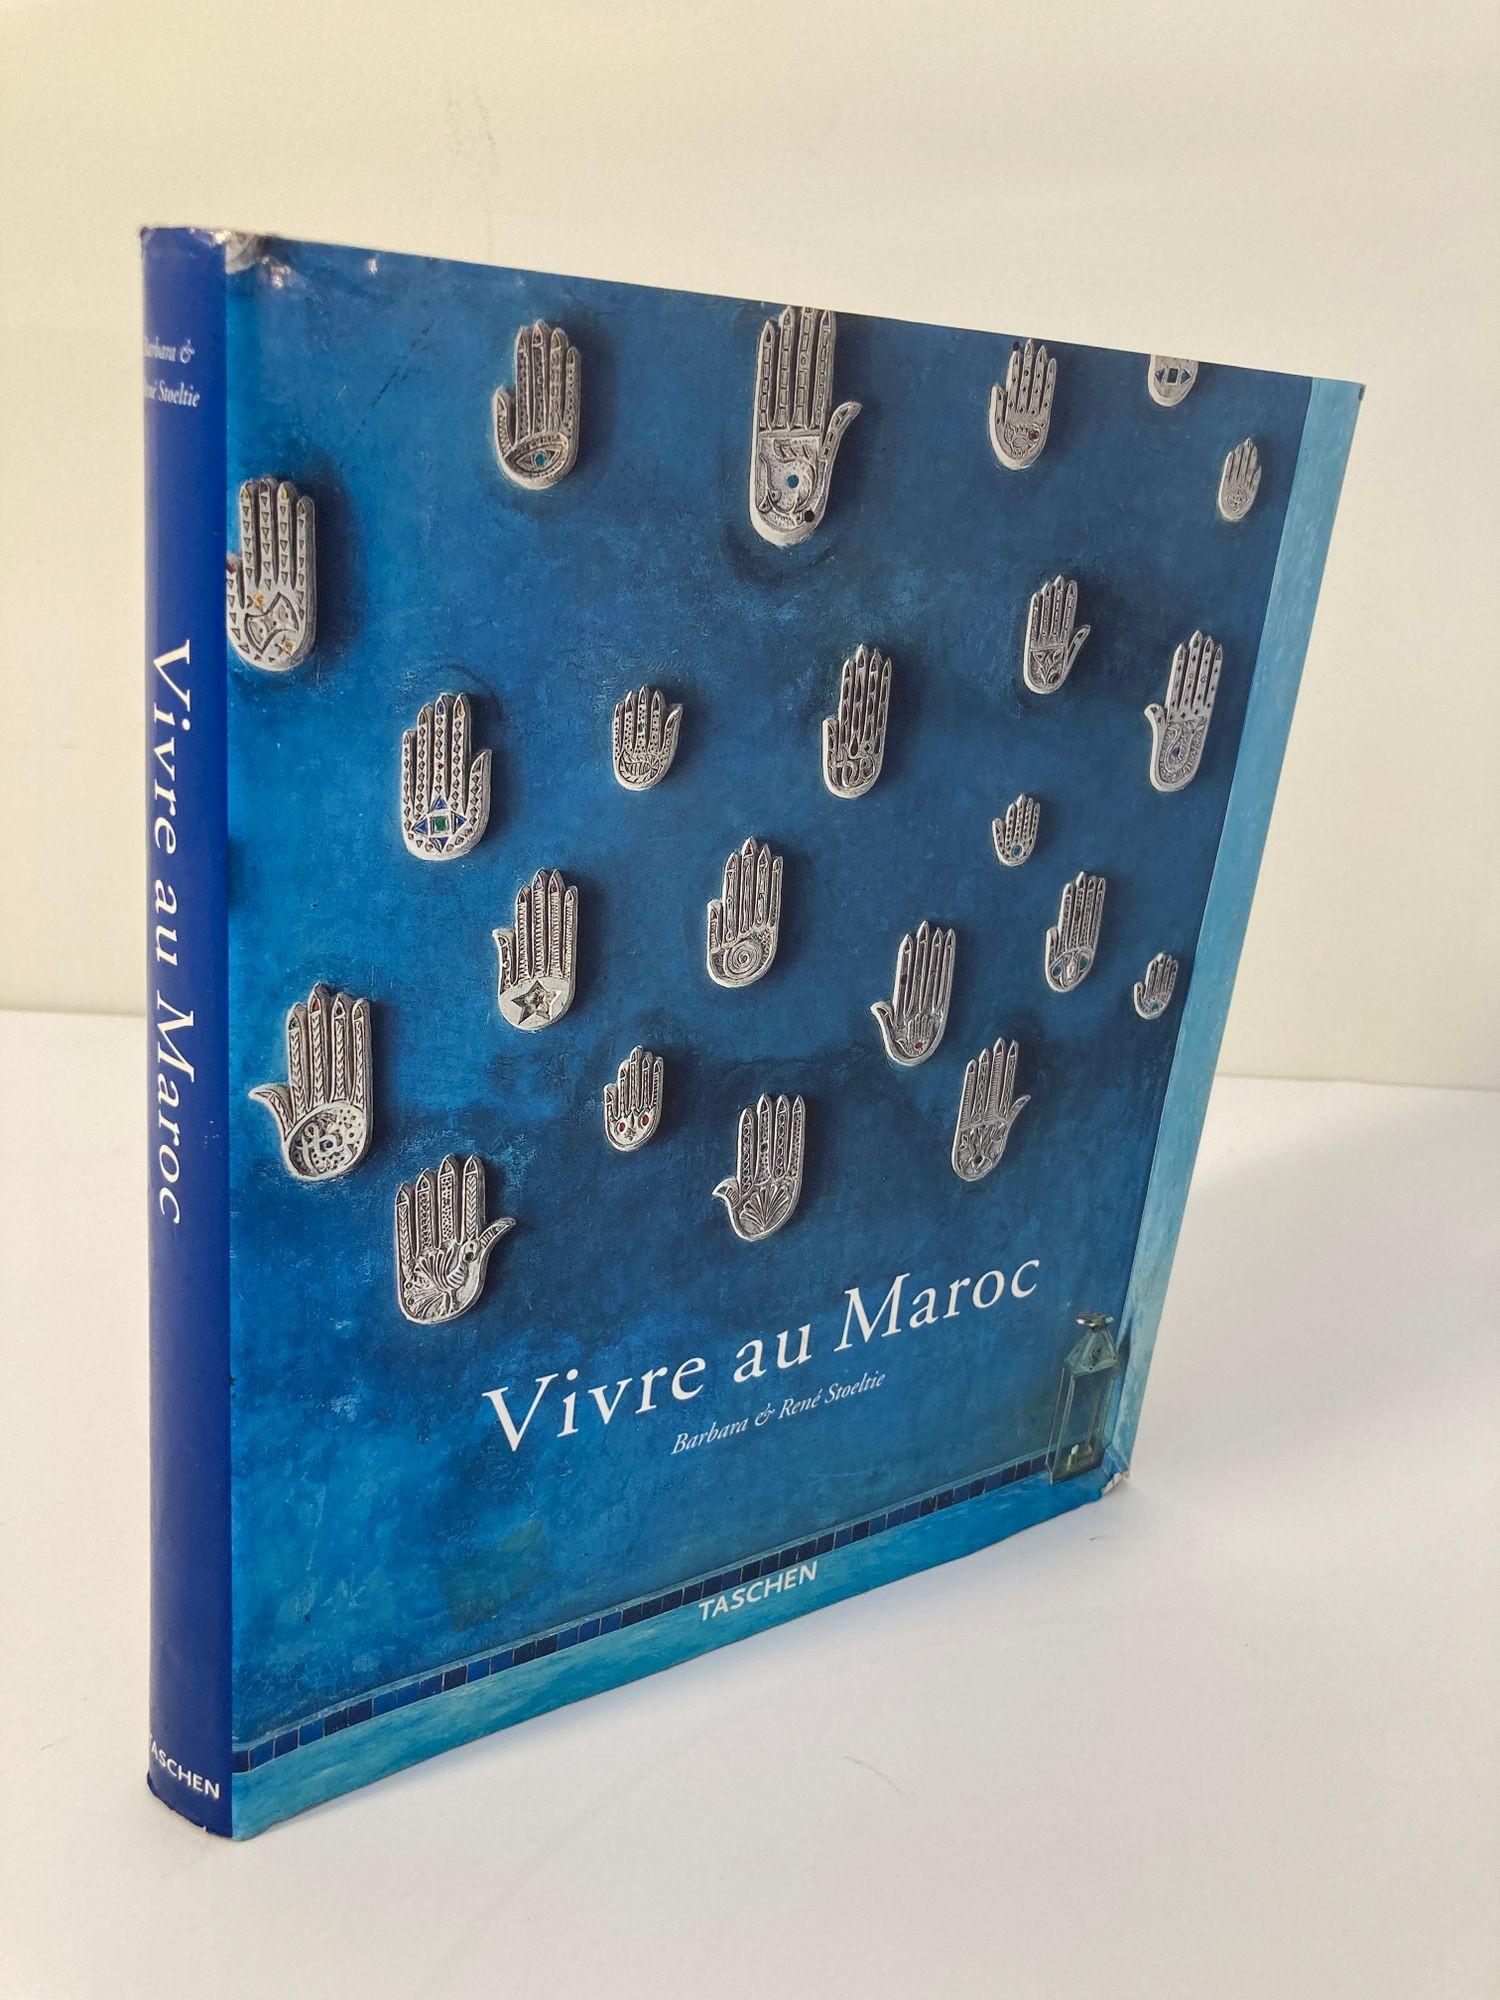 Living in Morocco Vivre au Maroc Hardcover Book – June 5, 2003.
By Stoeltie, Barbara and Rene Stoeltie.
Even if it is enough to cross the Mediterranean to get there, even if it is located only a stone's throw from the southern extremity of Spain,